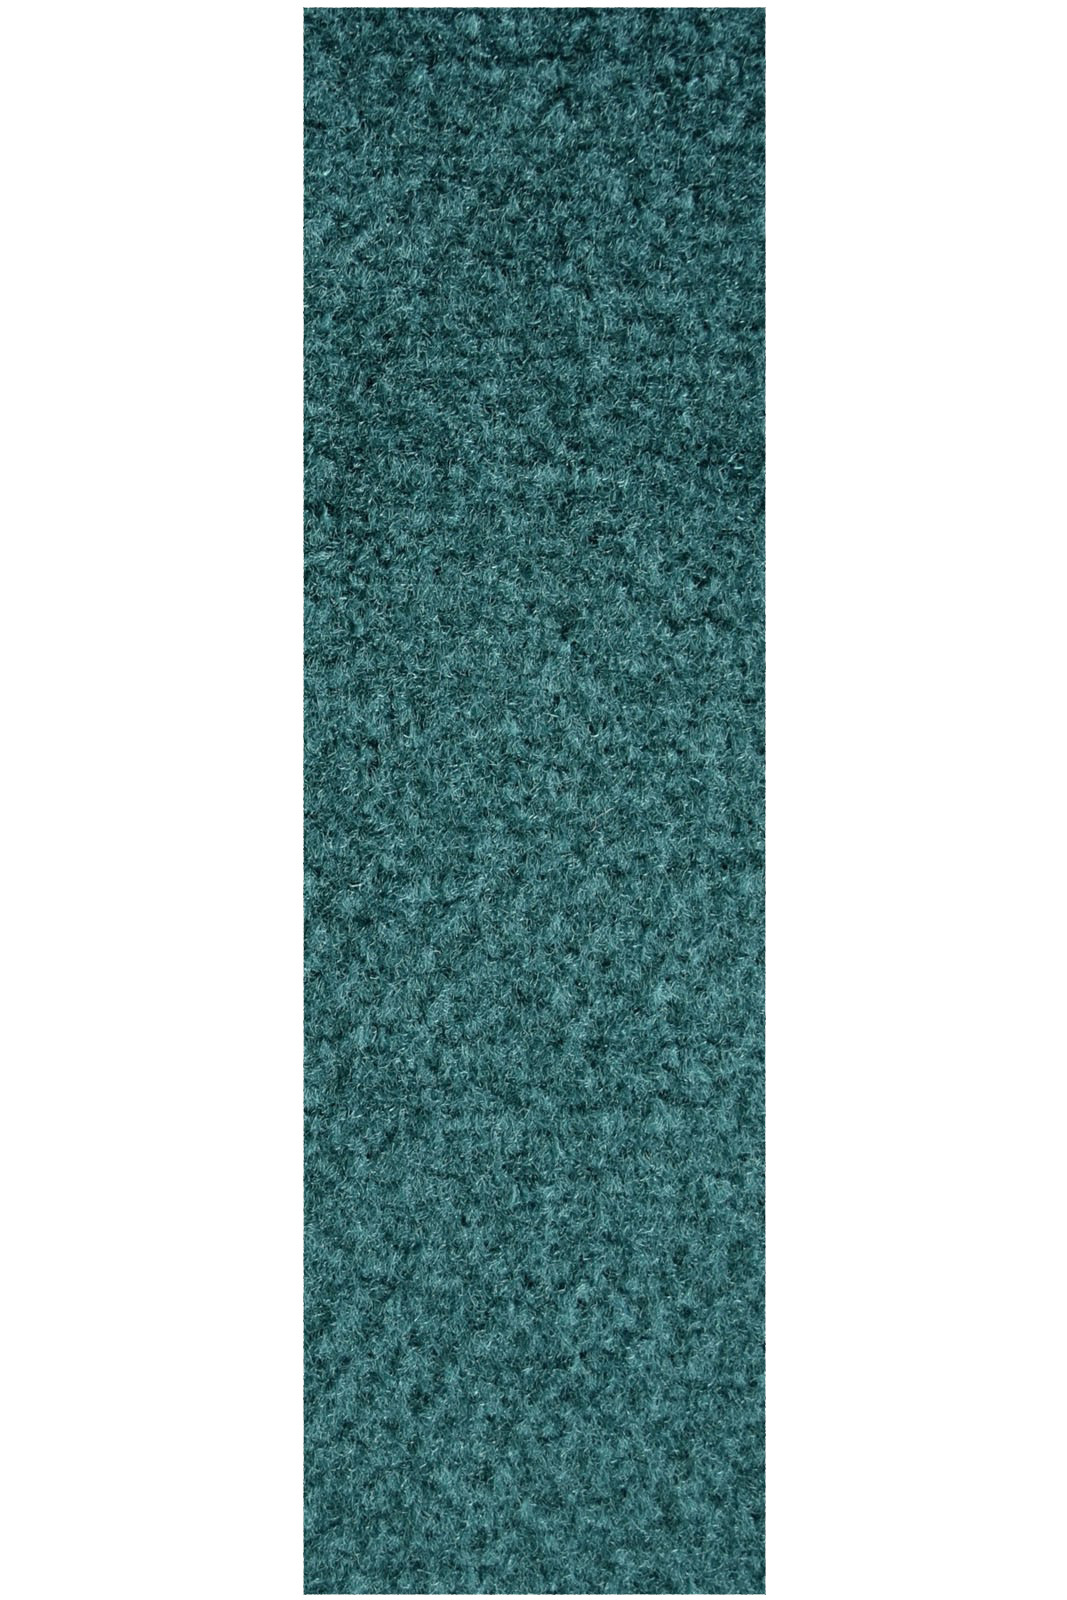 Commercial Indoor/Outdoor Teal Custom Size Runner 4' x 24' - Area Rug with Rubber Marine Backing for Patio, Porch, Deck, Boat, Basement or Garage with Premium Bound Polyester Edges - image 1 of 1